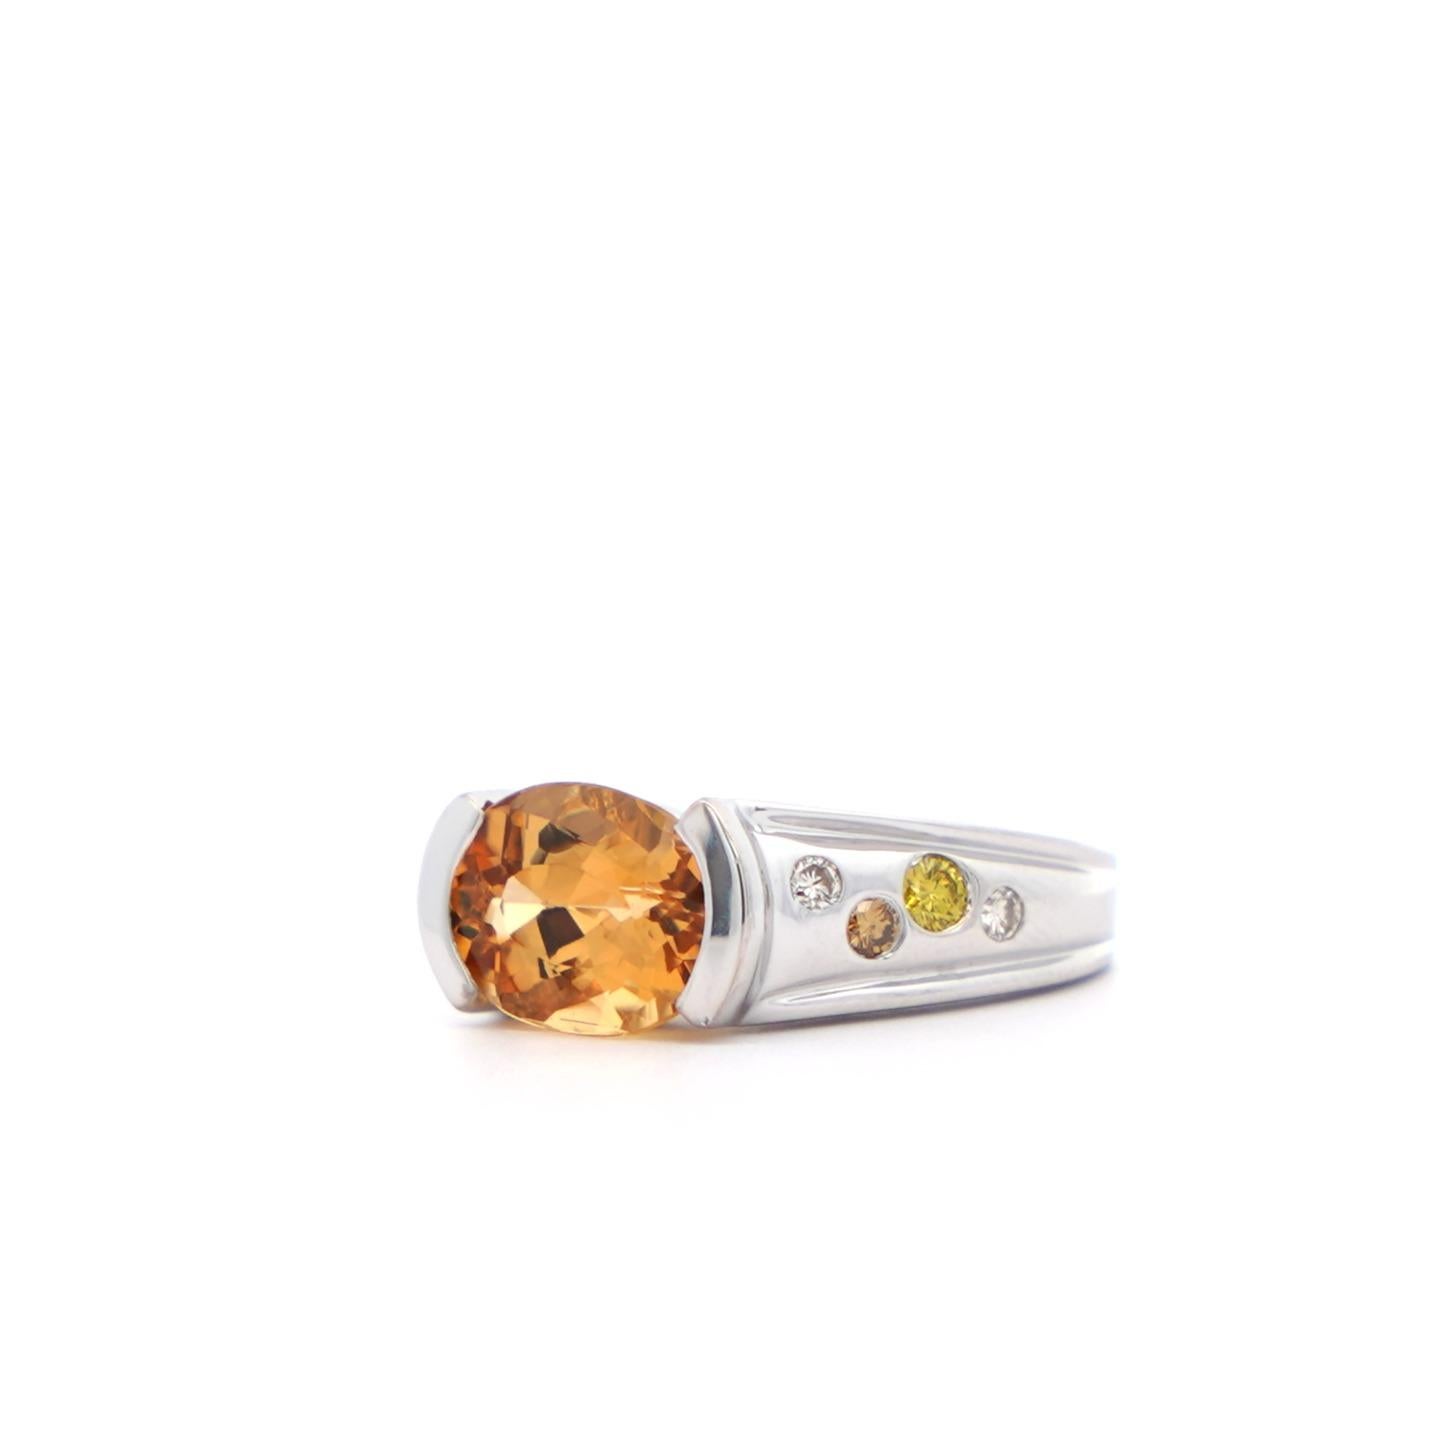 A precious topaz and diamond ring, set in 18k solid white gold. Centering a yellowish orange precious topaz center stone, oval brilliant cut for optimal color balance and brilliance. Featuring a chic east-west half-bezel setting. Adorned with a